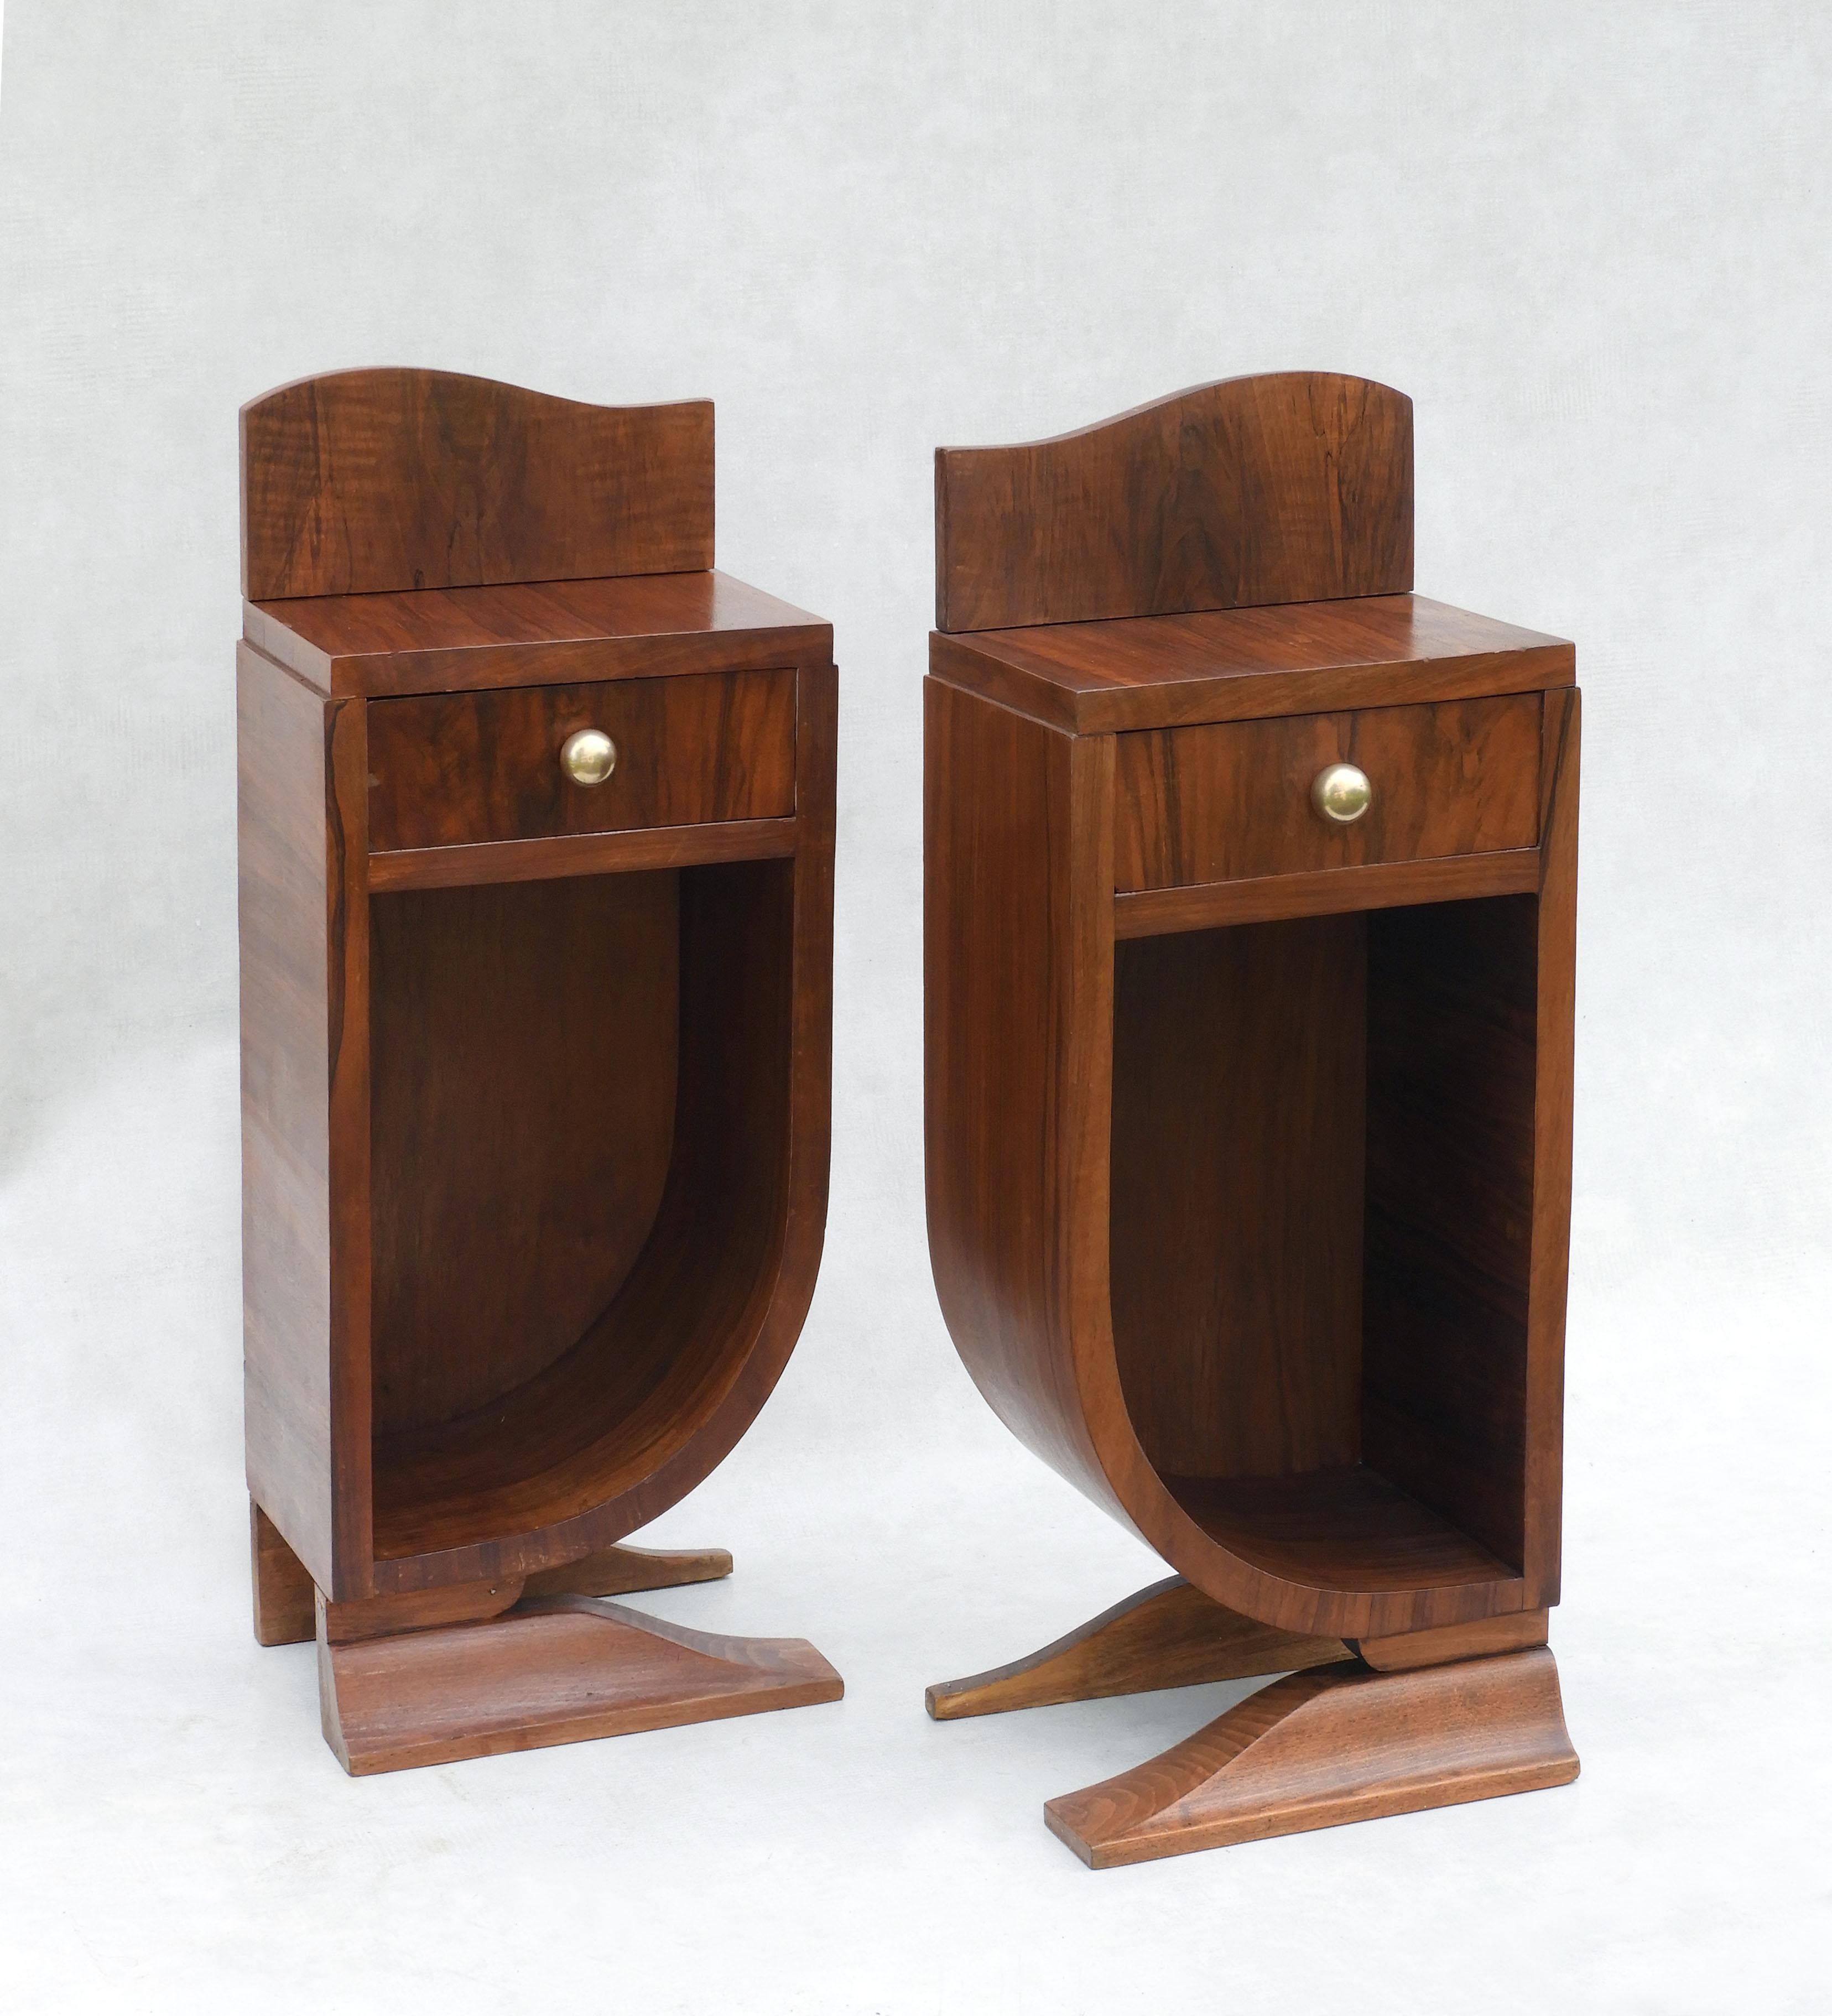 Veneer Pair of Art Deco Nightstands, Side Cabinets or Sofa End Tables, C1930s France For Sale